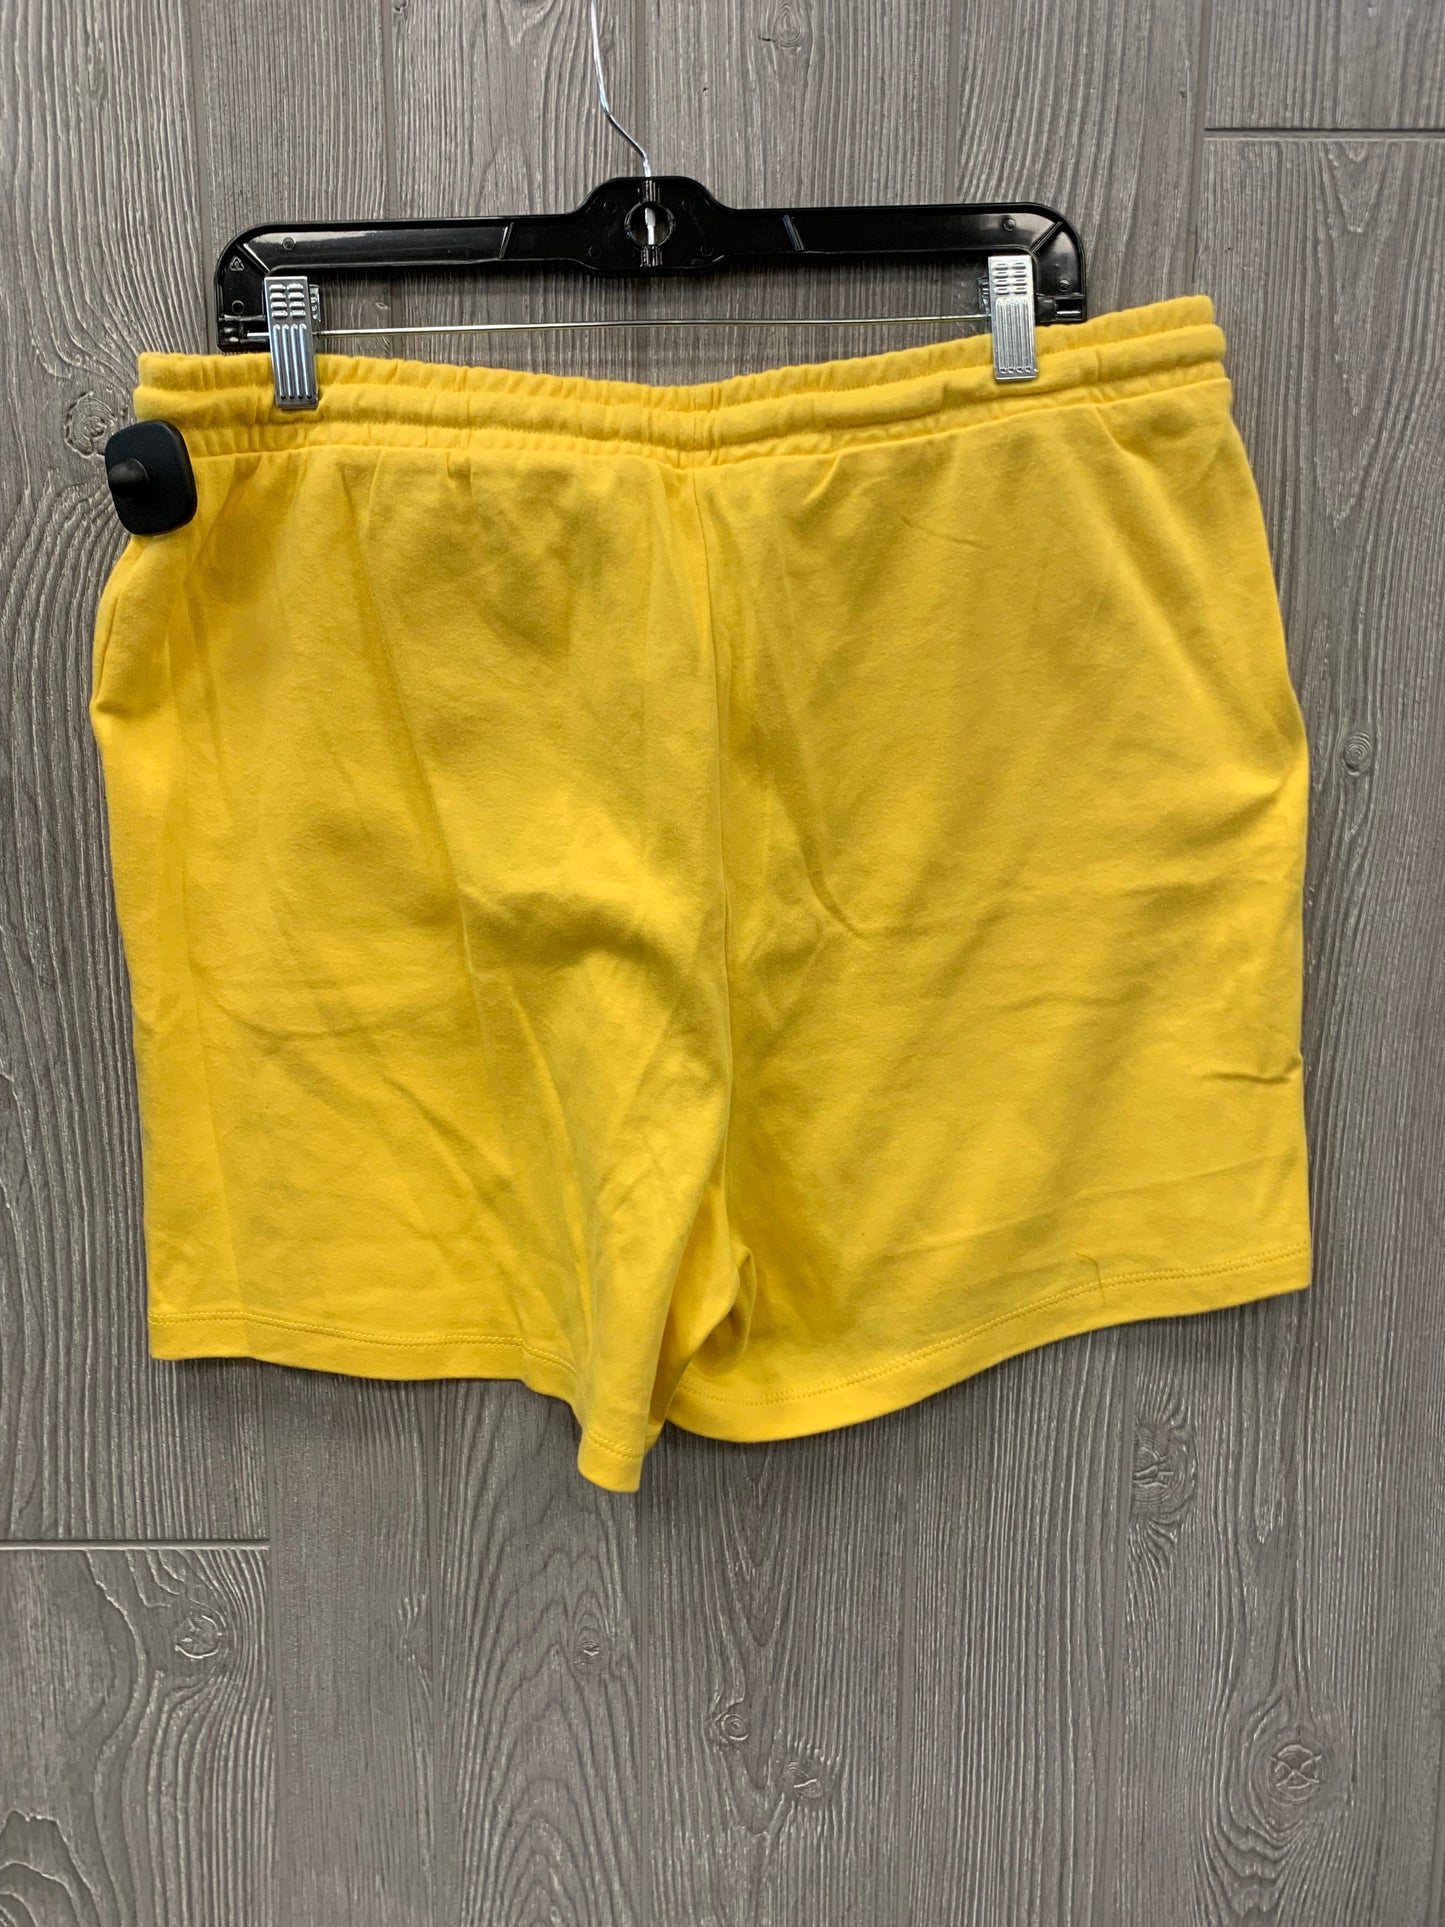 Shorts By Zenana Outfitters  Size: 18